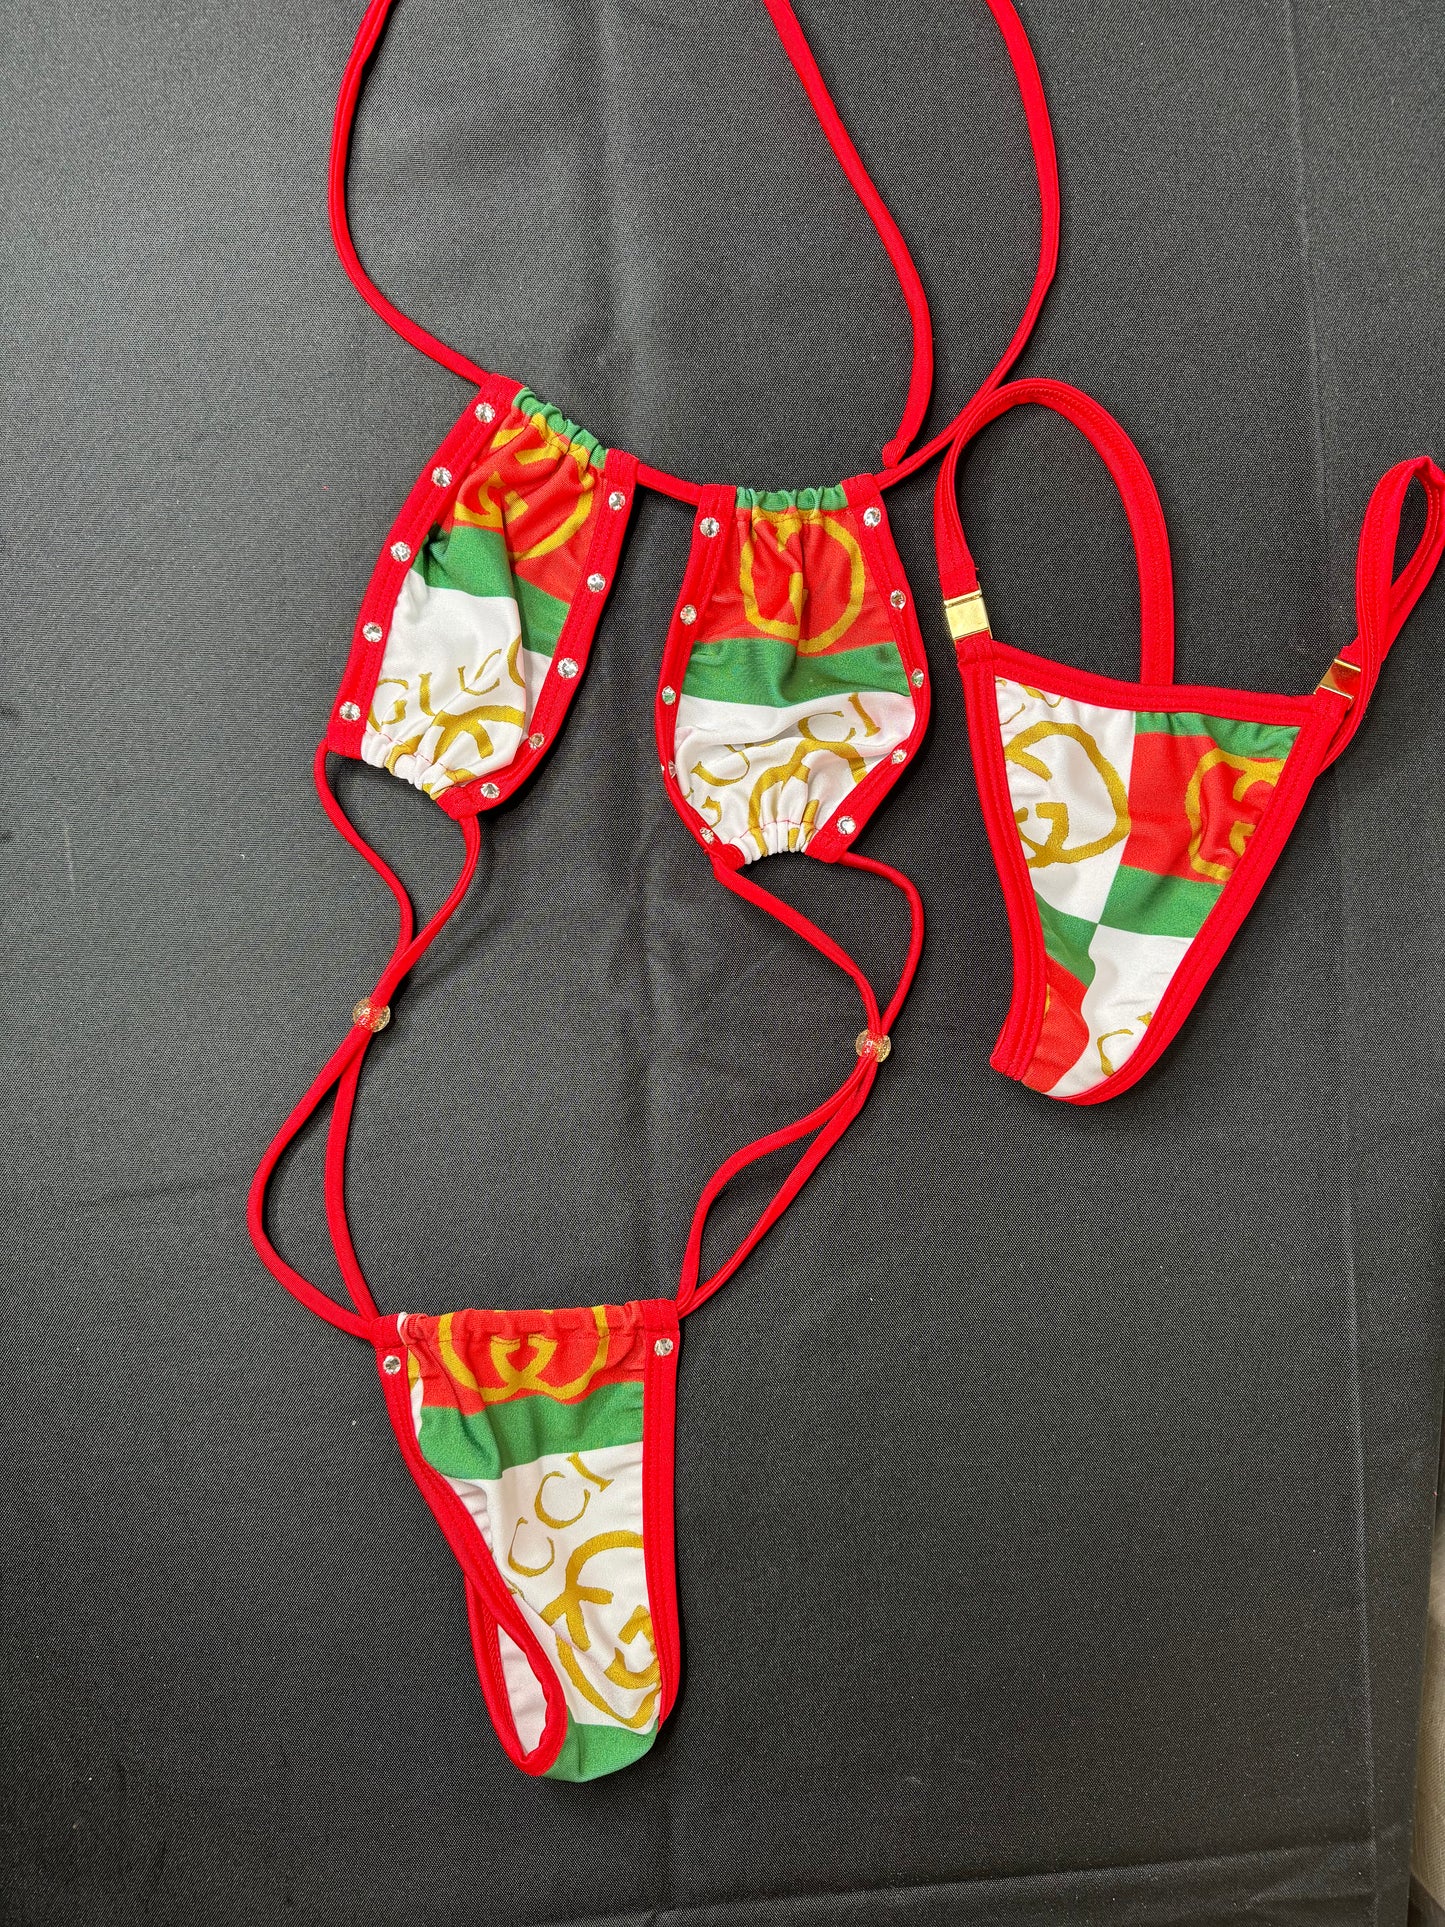 Exotic Dance Wear Sling Shot Outfit Red/Green Lingerie